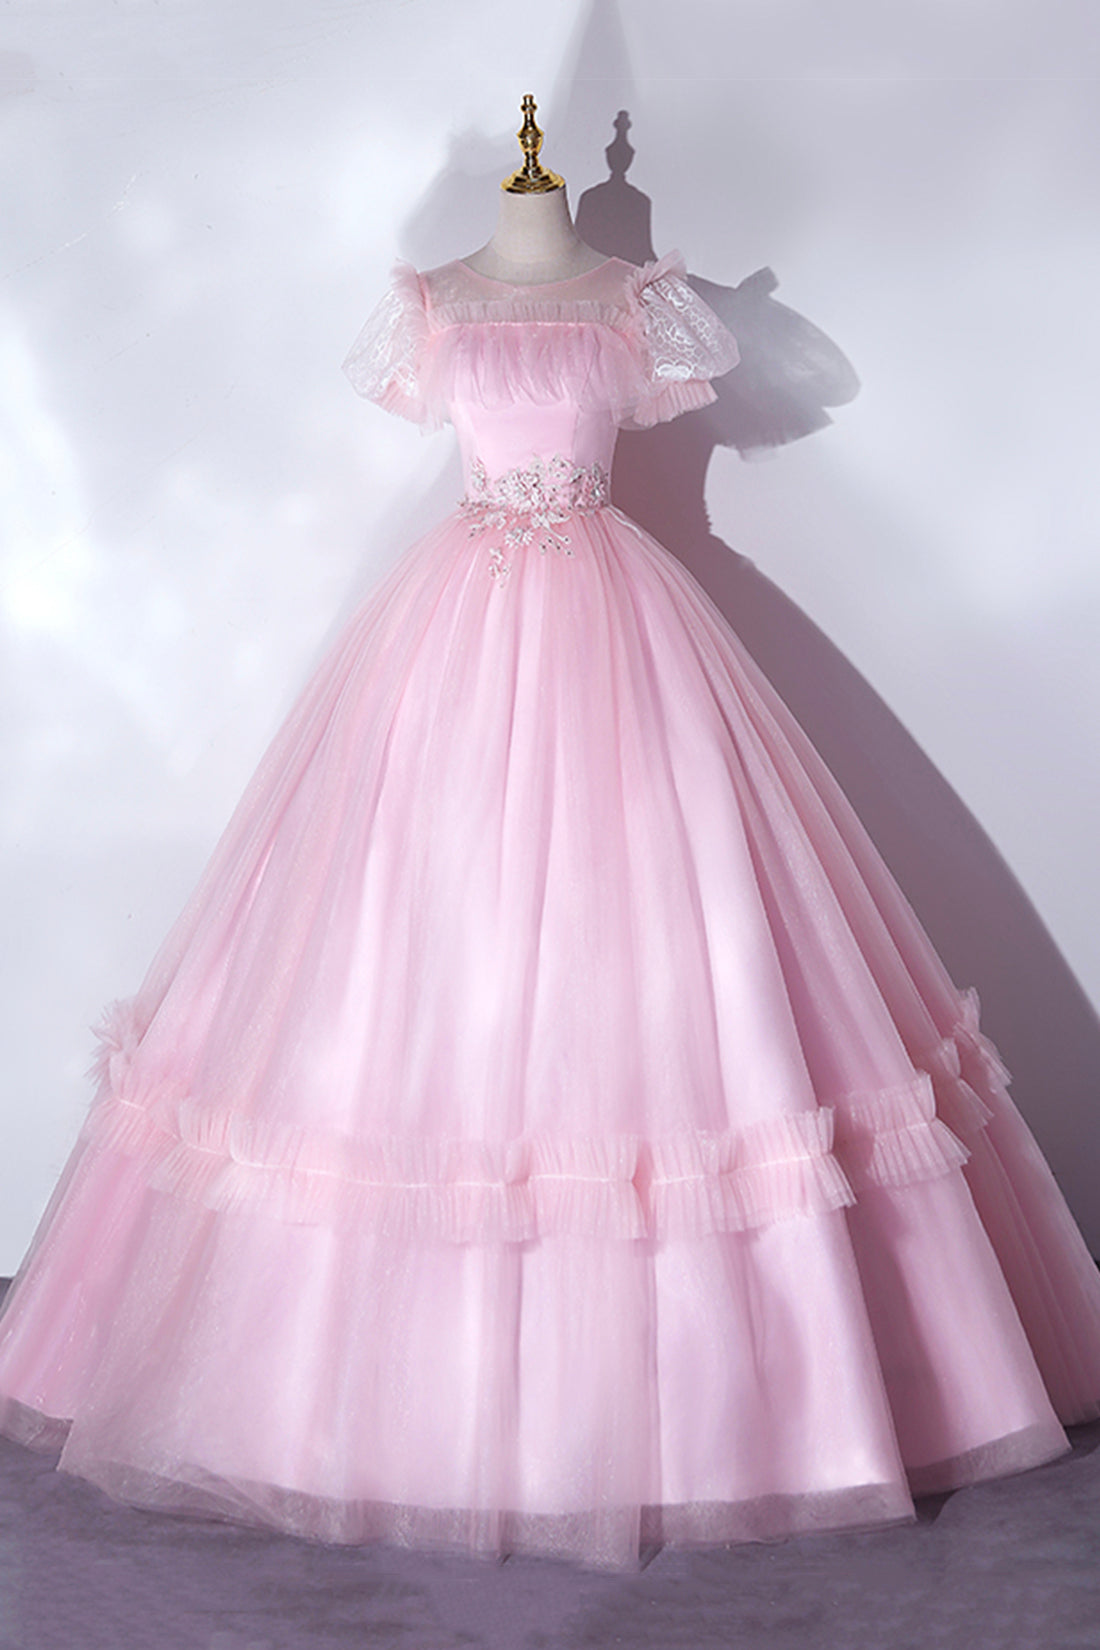 Pink Tulle Lace Long Prom Dress Outfits For Girls, Lovely A-Line Short Sleeve Evening Dress